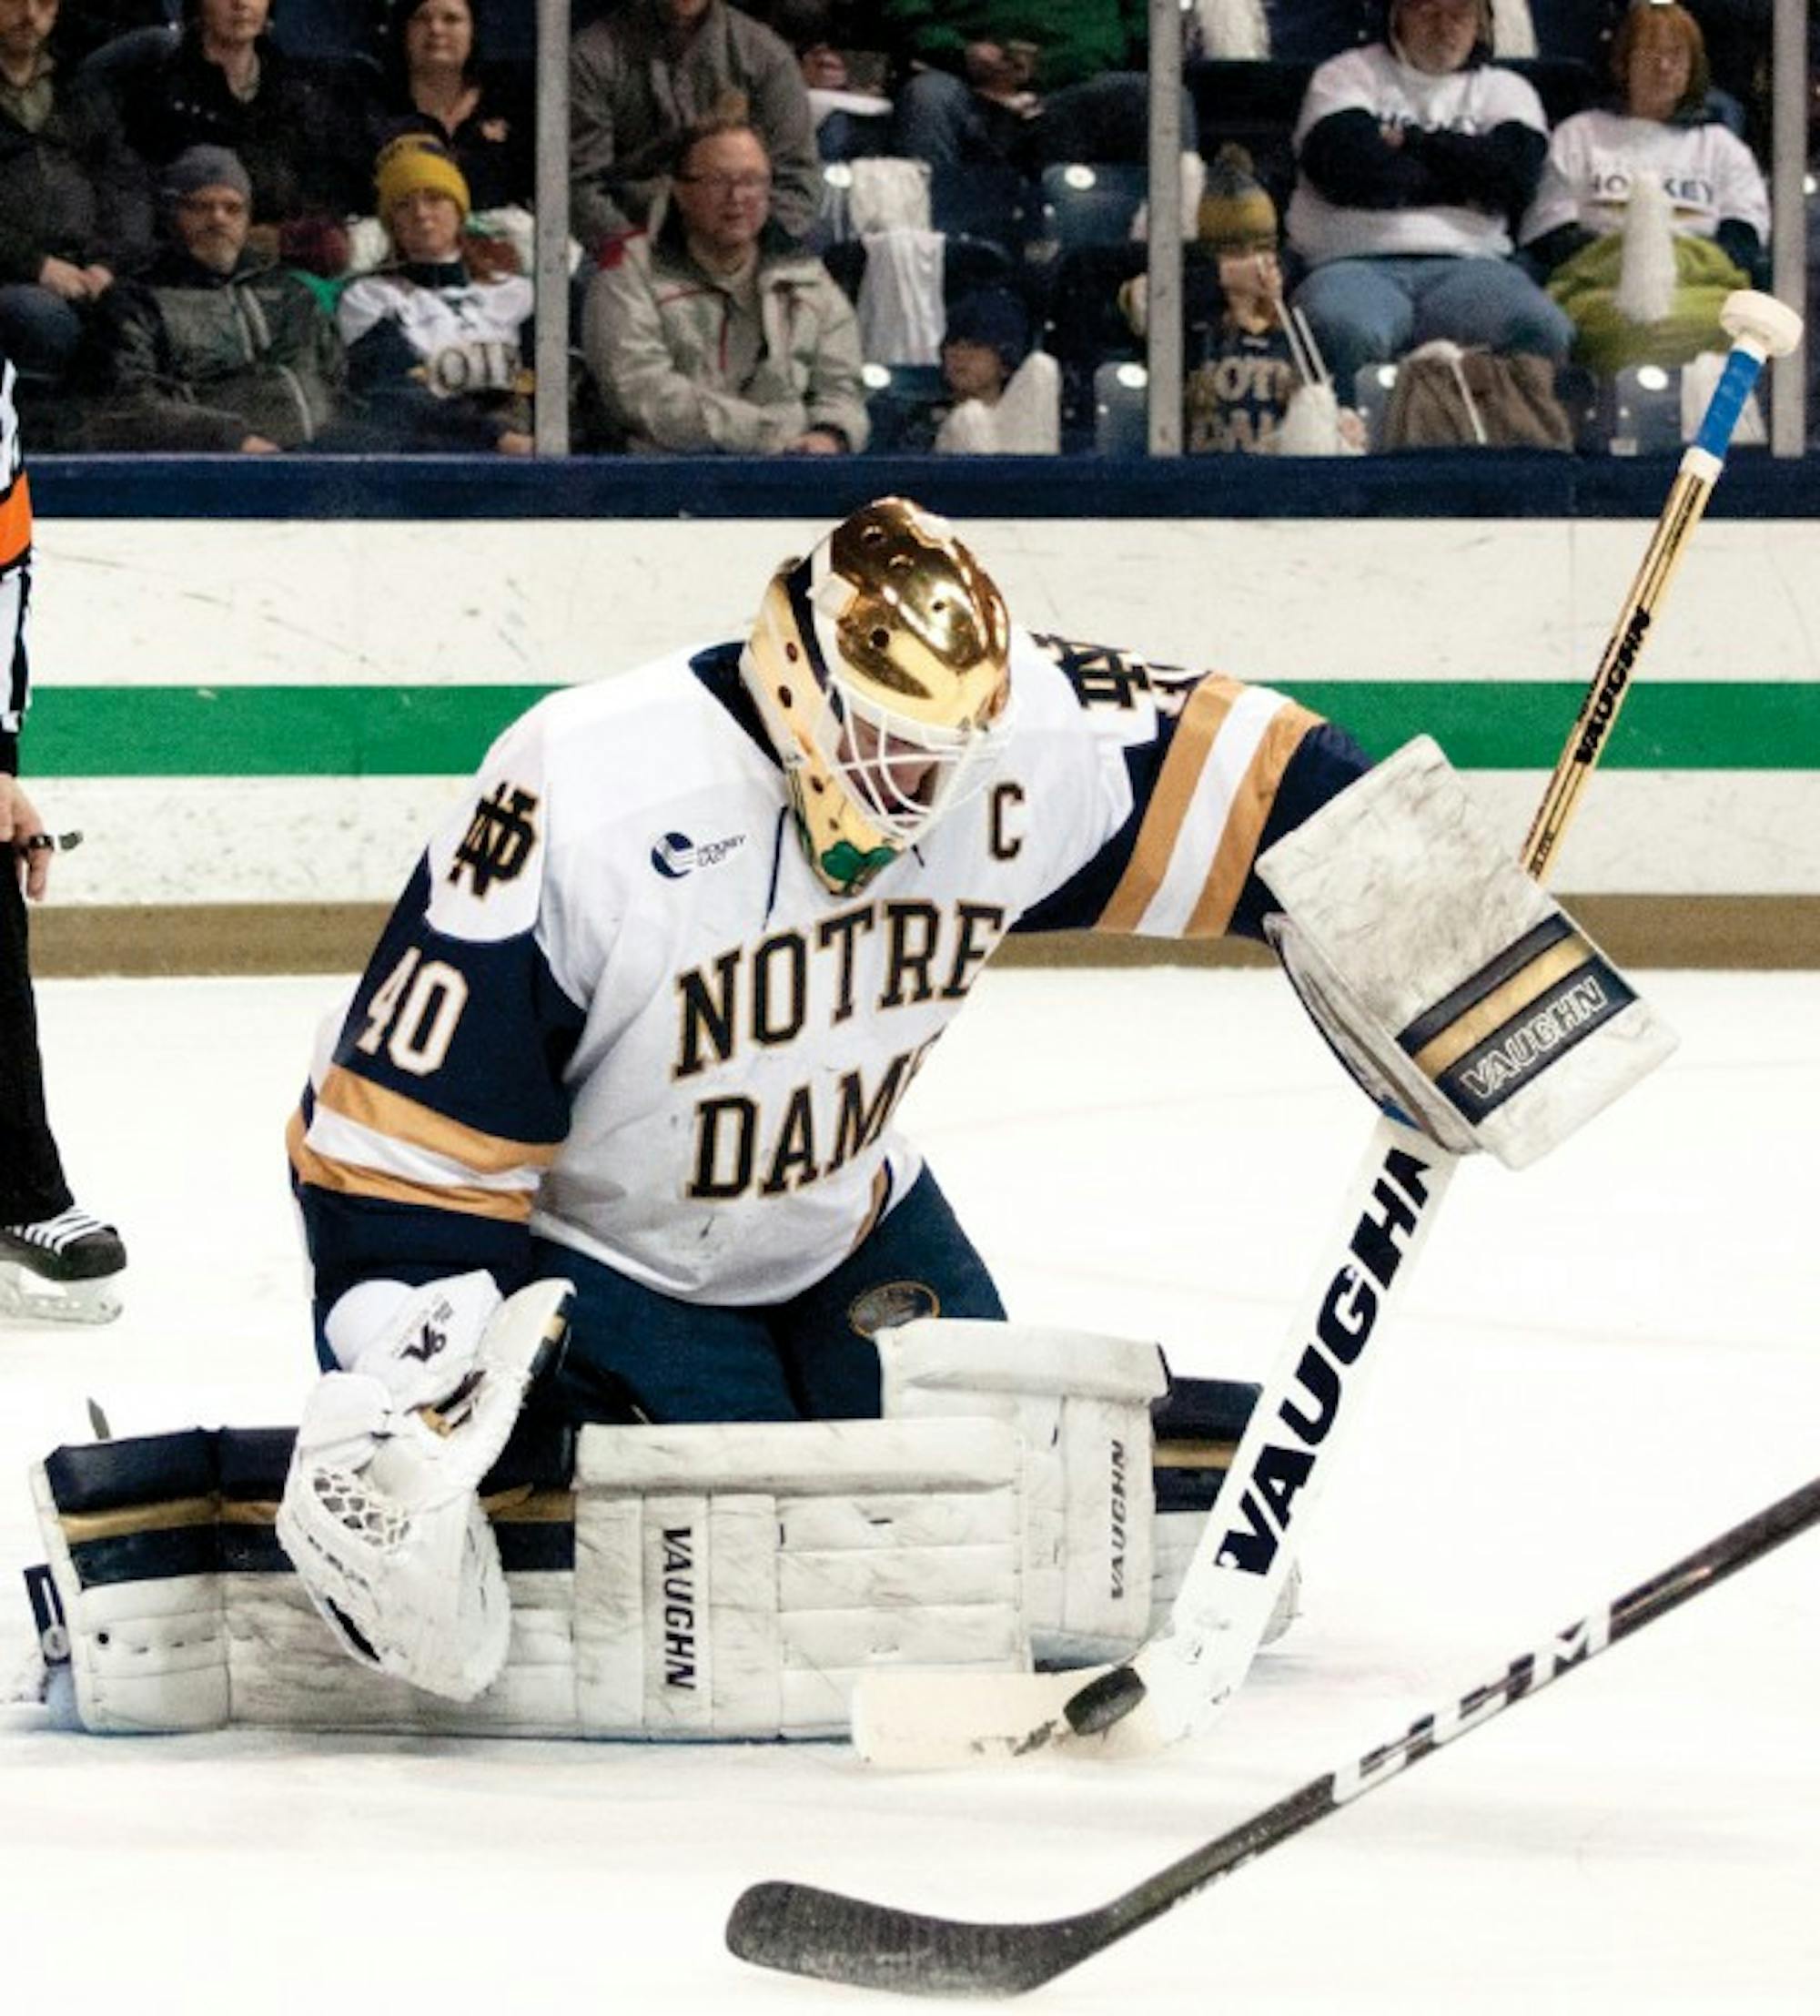 Irish junior goalie Cal Petersen makes a save during Notre Dame’s 4-1 win over Vermont on Feb. 4 at Compton Family Ice Arena.